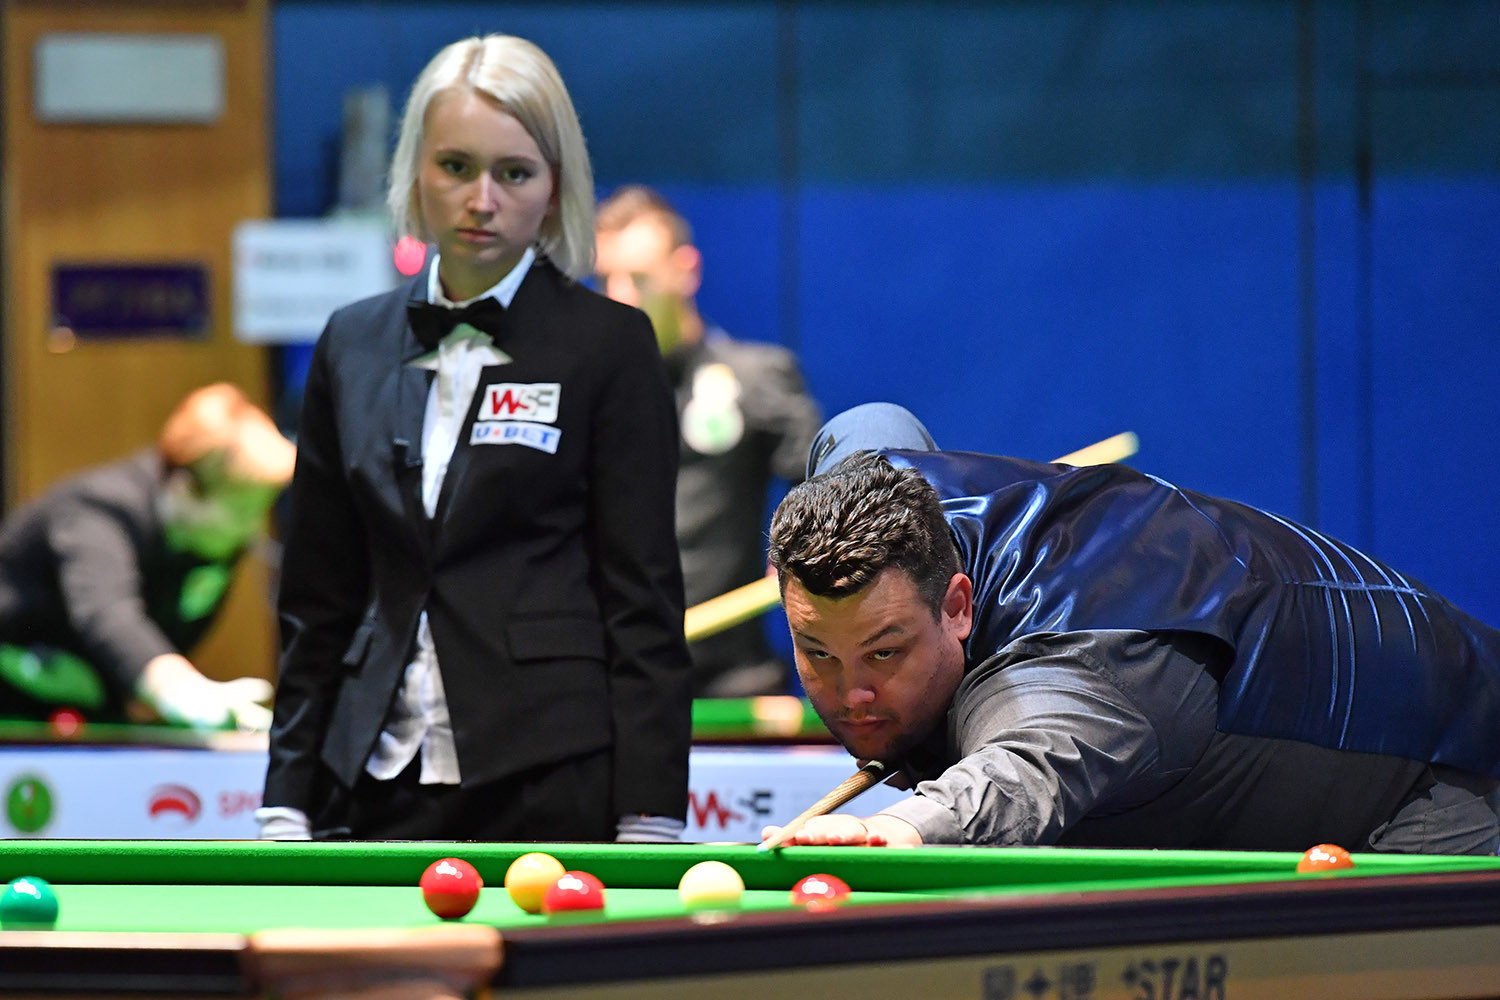 Houston's Q Ball Snooker & Pool will host the Championships ©WPBSA